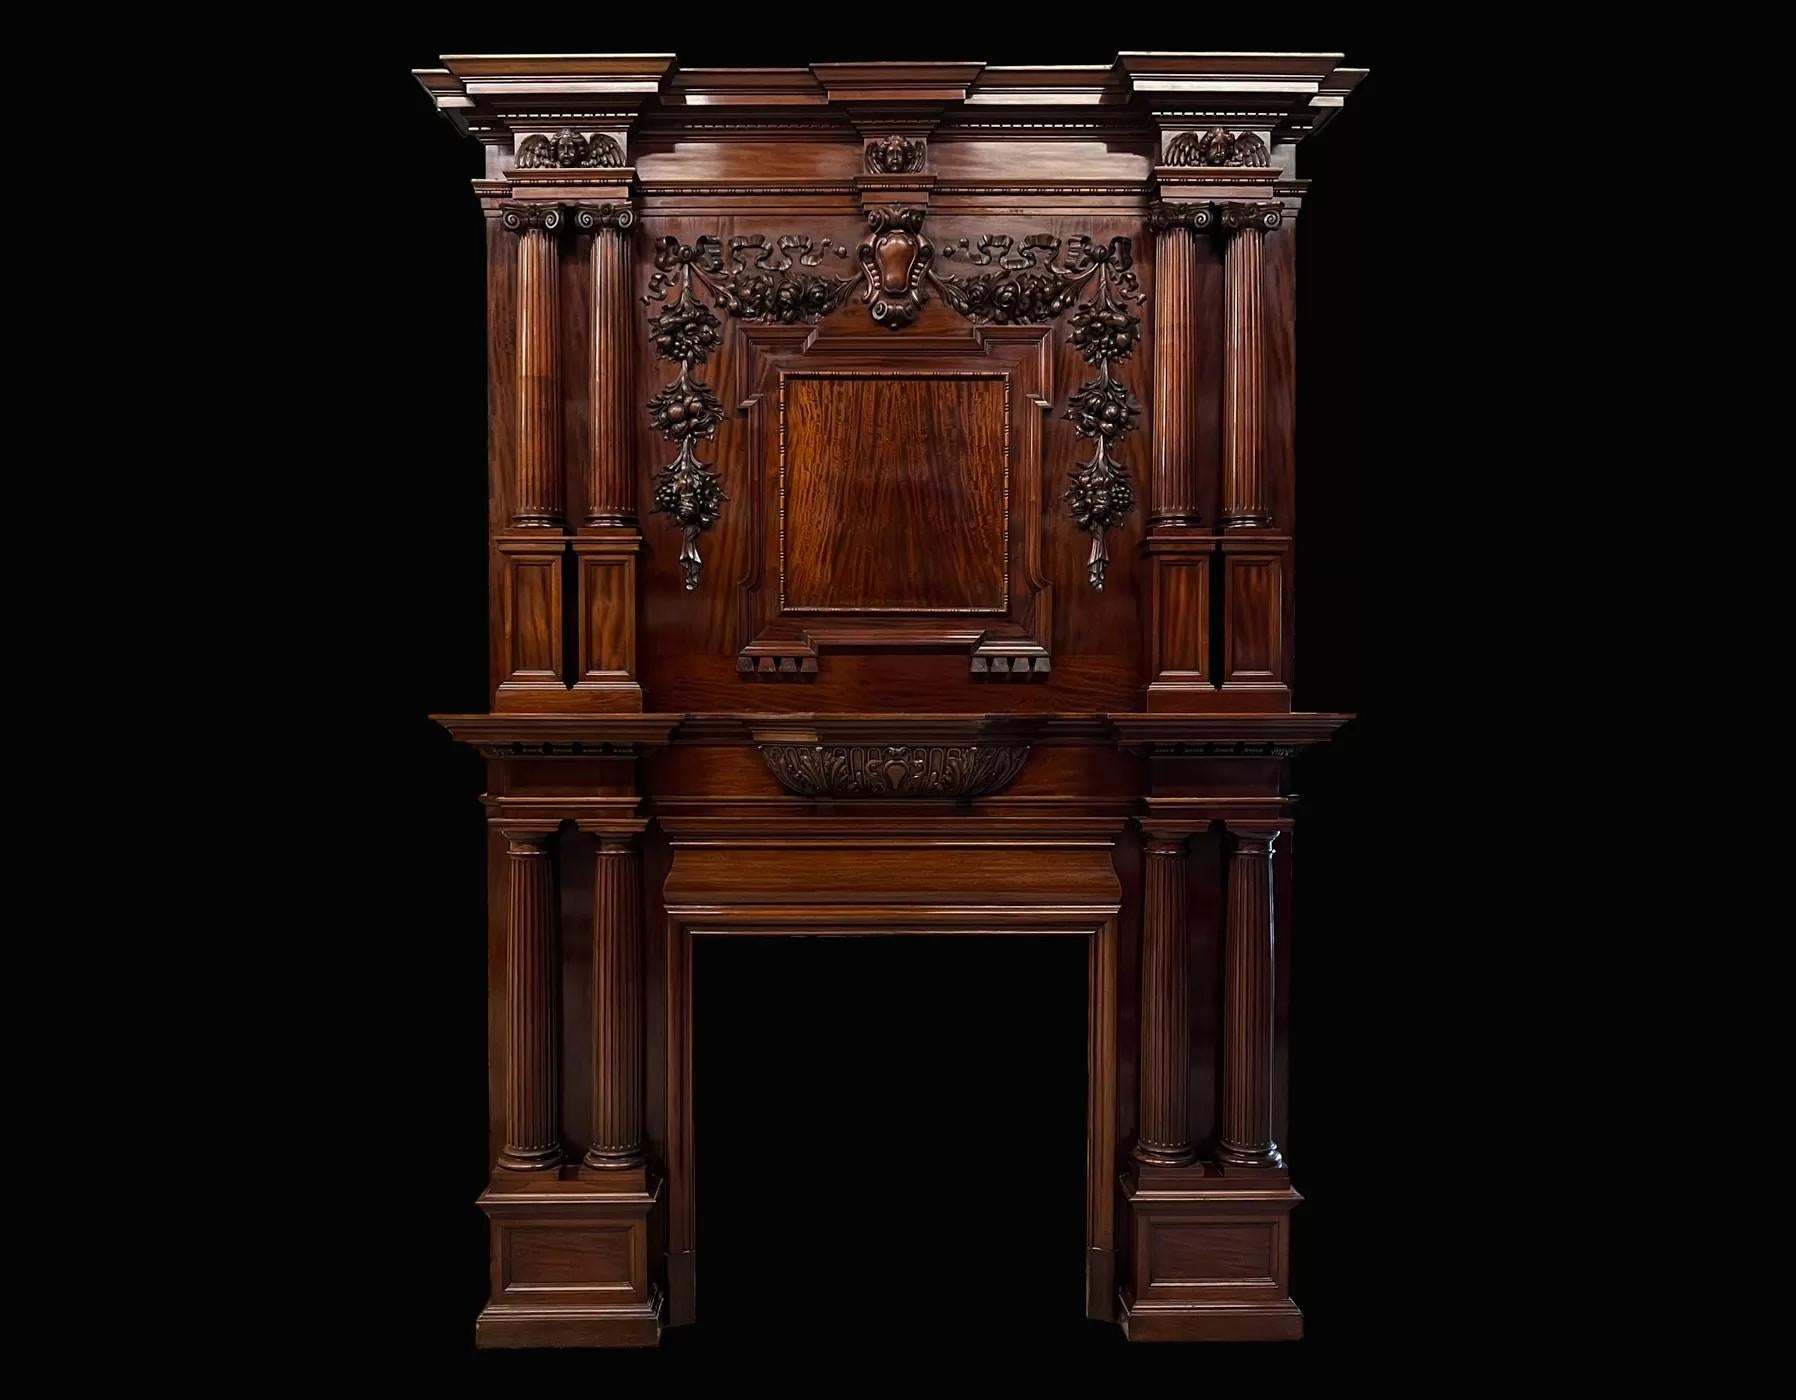 A magnificent Antique English mahogany mantelpiece of exceptional quality.
Large in scale and beautifully carved from Mahogany in the Victorian Baroque Revival style.

Produced with extremely fine carvings and carefully selected cuts of timber. 

In